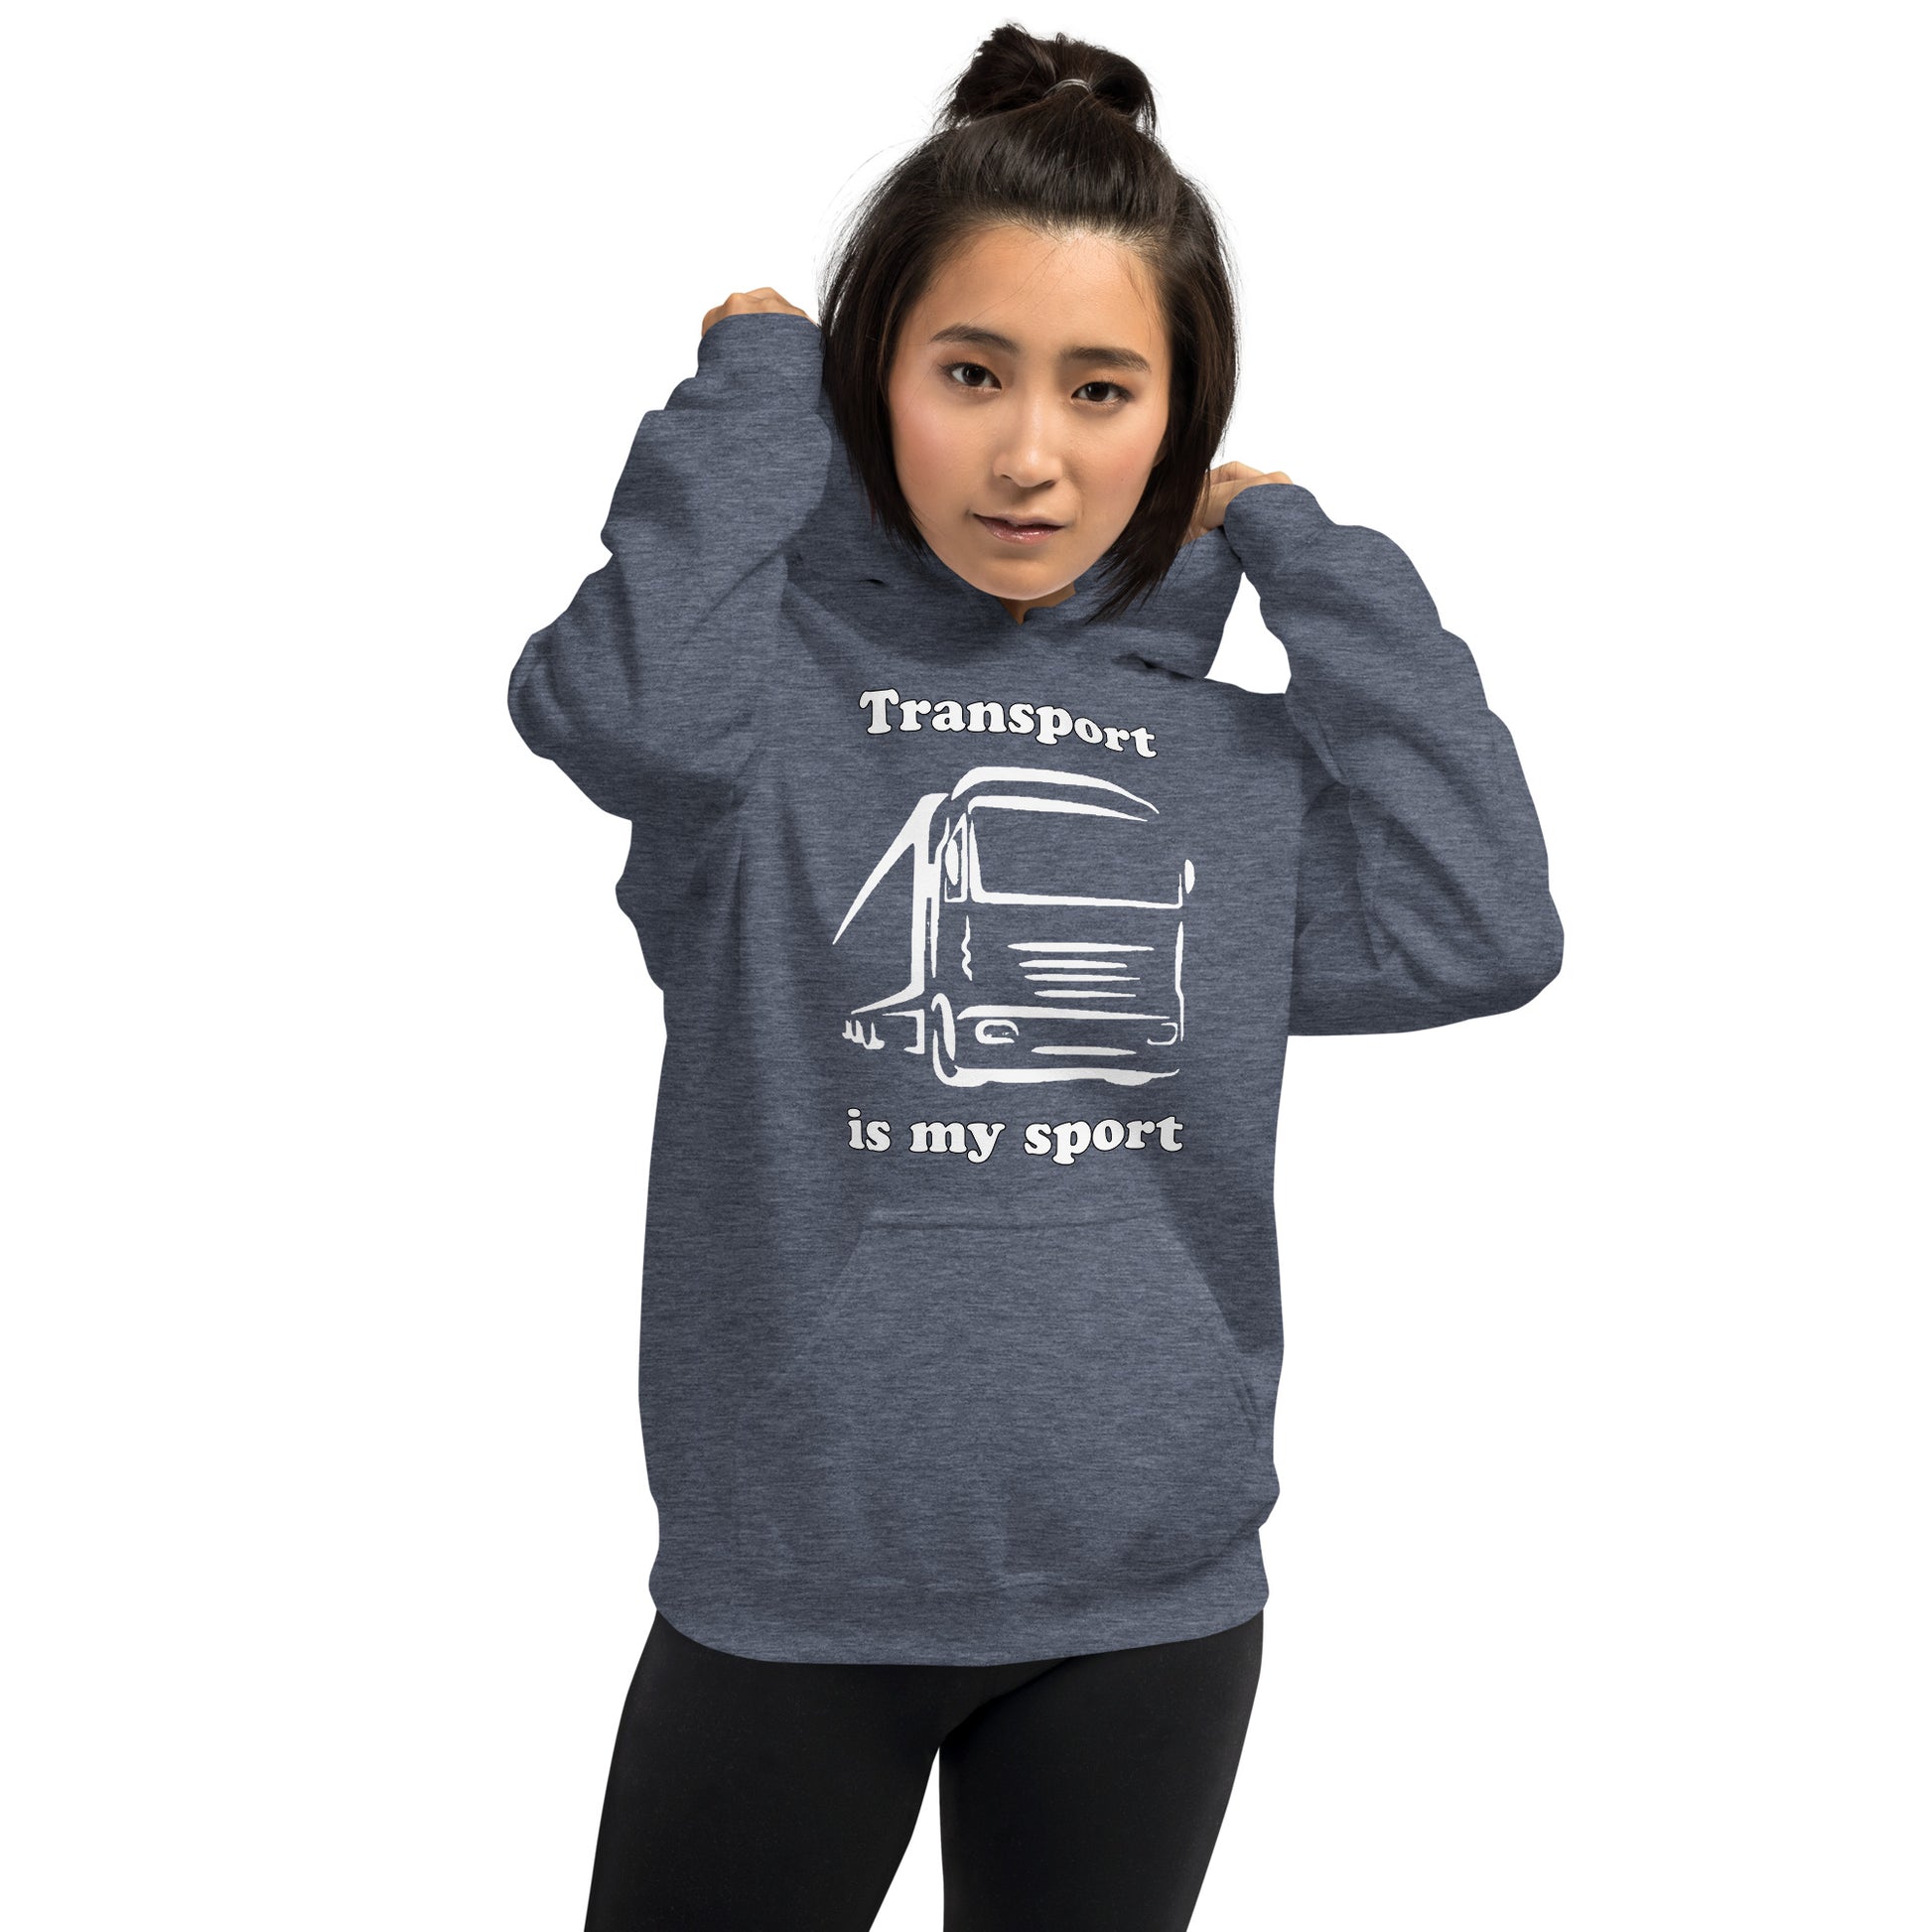 Woman with dark navy blue hoodie with picture of truck and text "Transport is my sport"